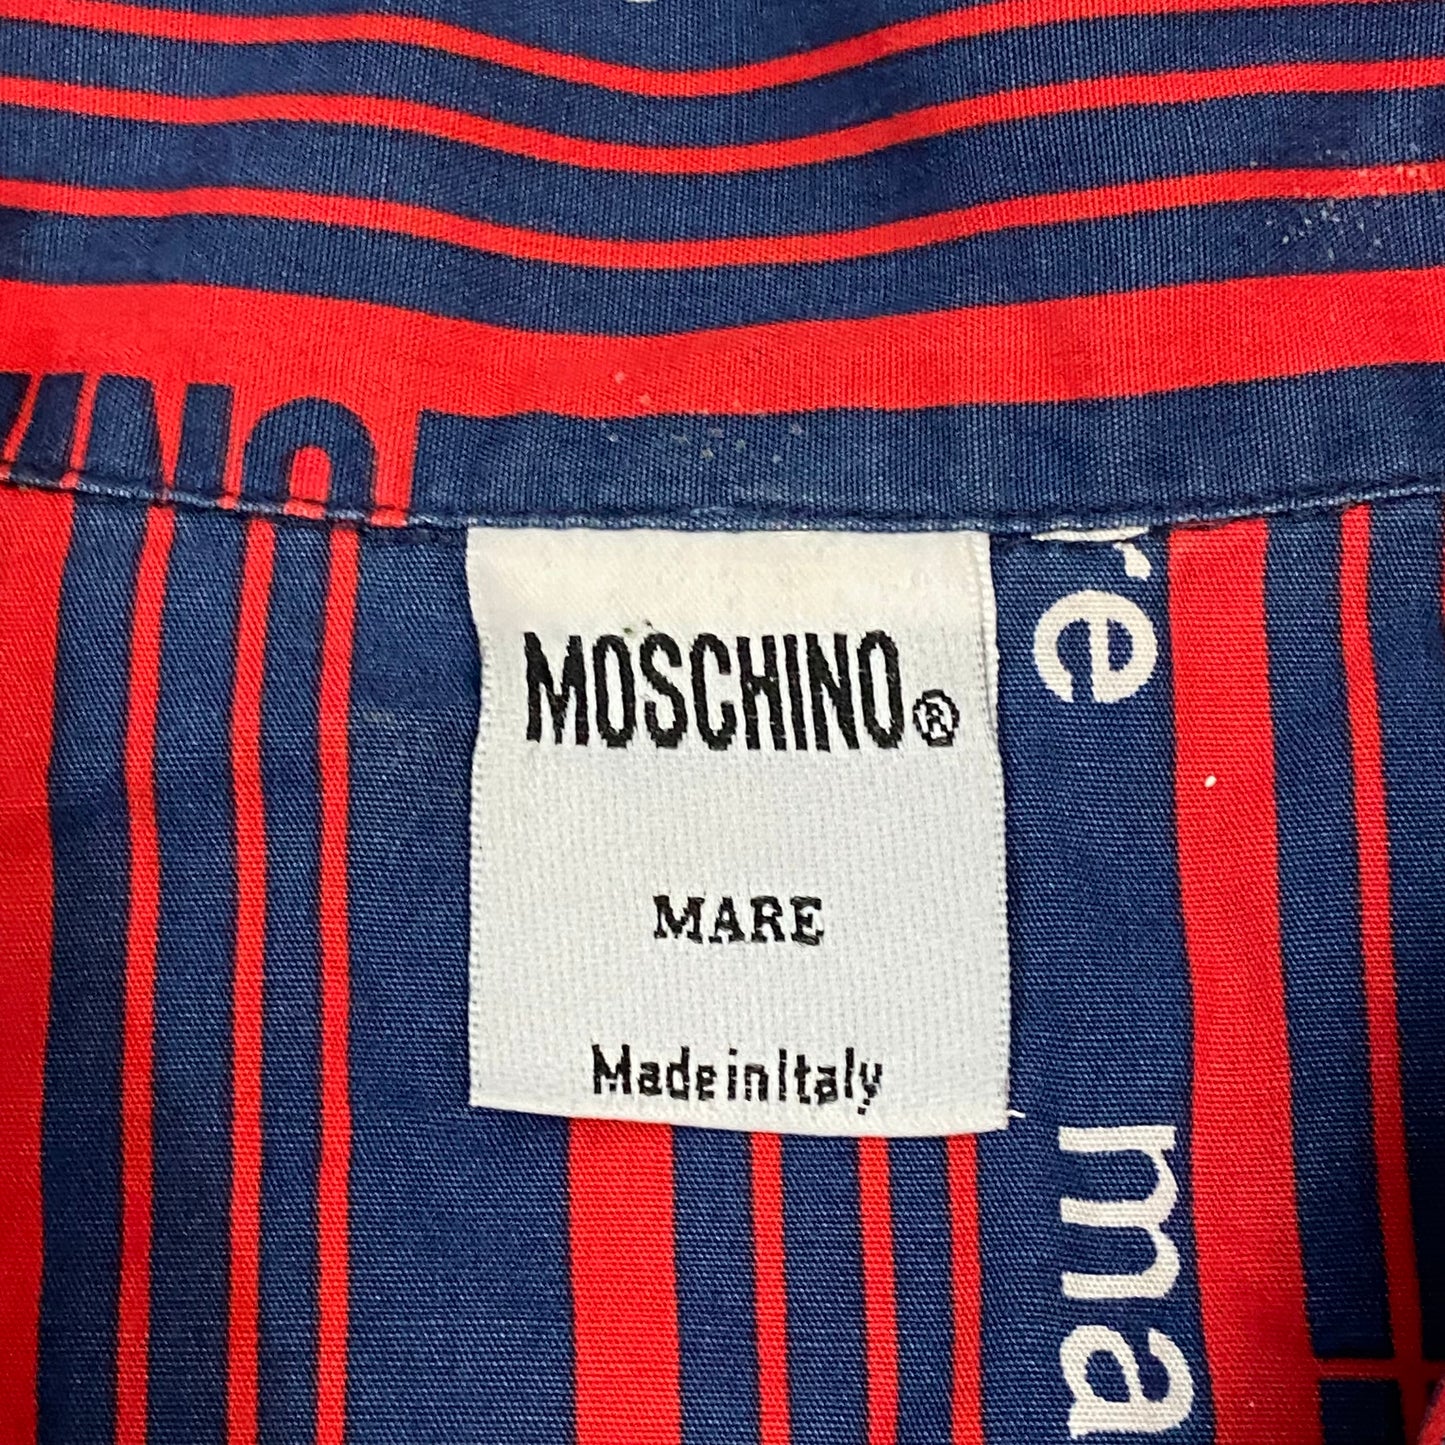 Moschino Mare 1990’s Striped Repeat Shirt - XL